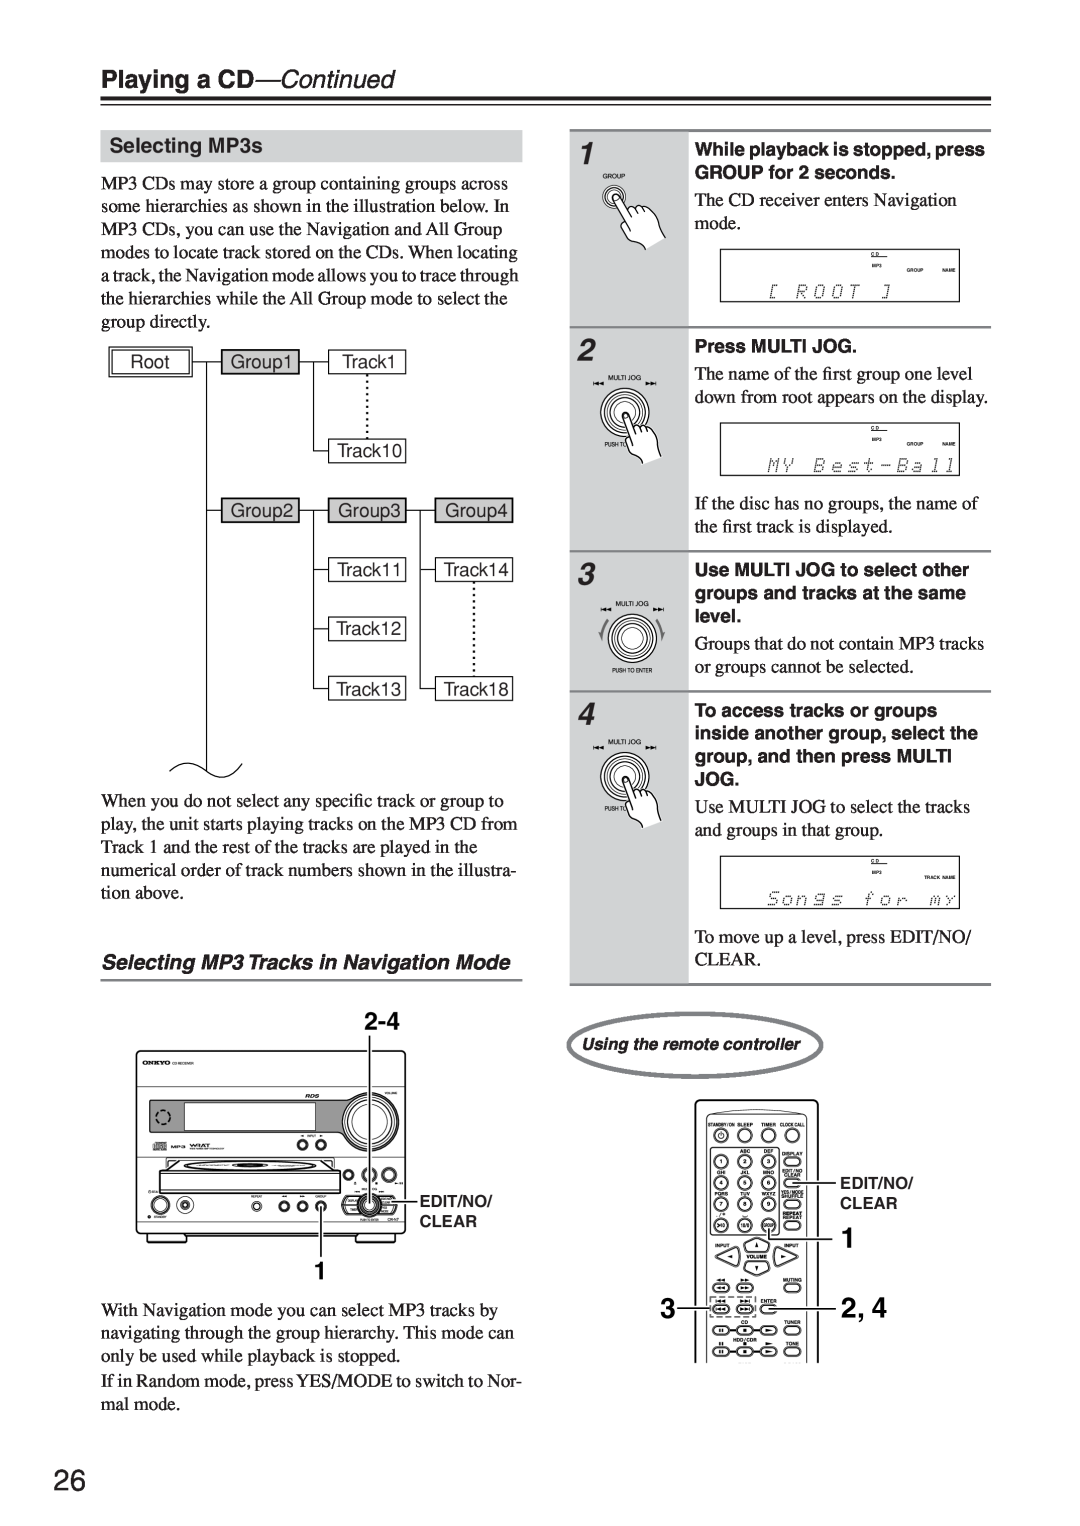 Onkyo CR-N7 instruction manual Selecting MP3s, Selecting MP3 Tracks in Navigation Mode, Playing a CD-Continued, mode, Clear 